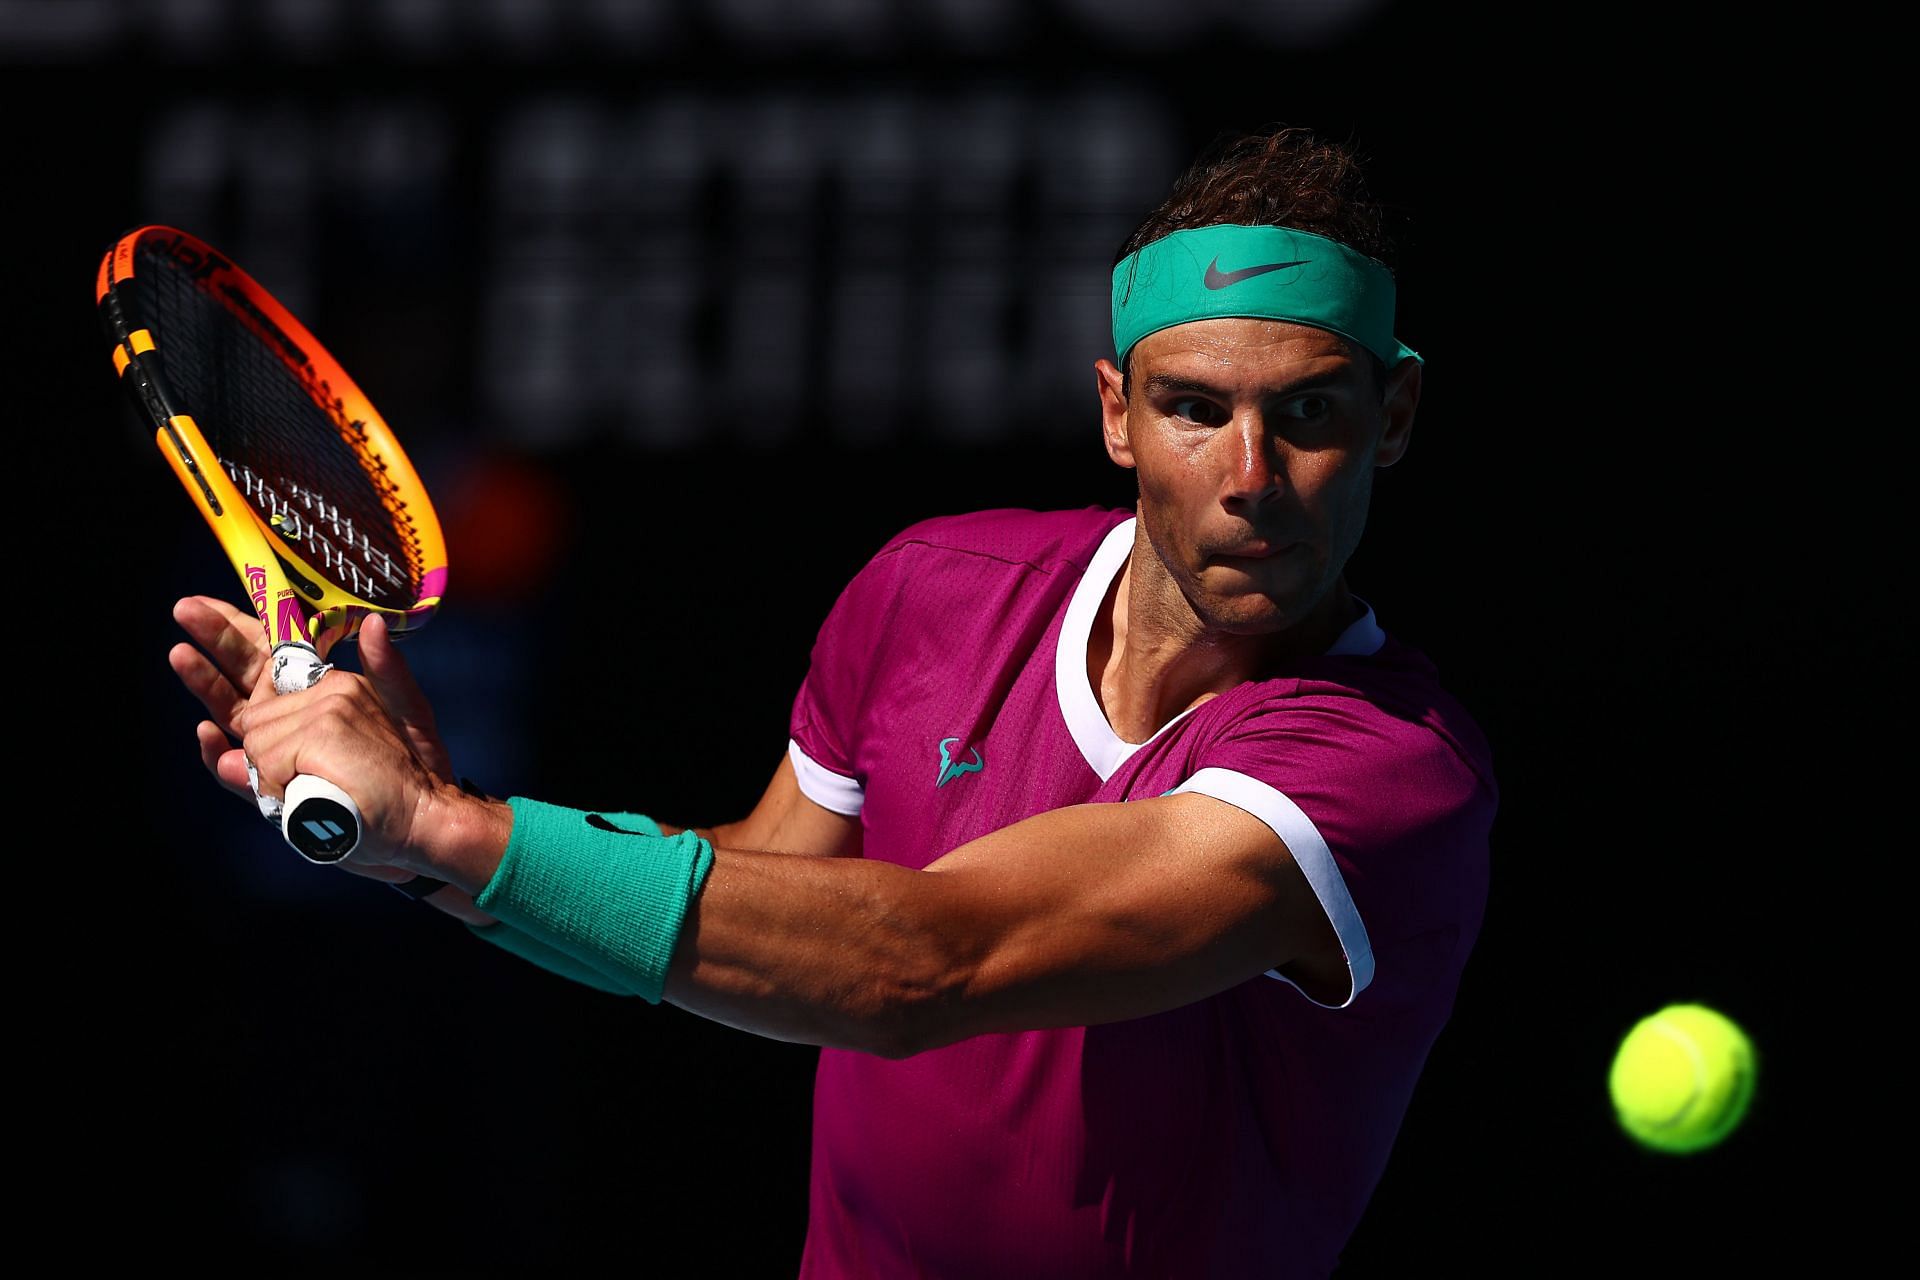 Rafa believed that all comebacks become harder with age, making his latest comeback the hardest